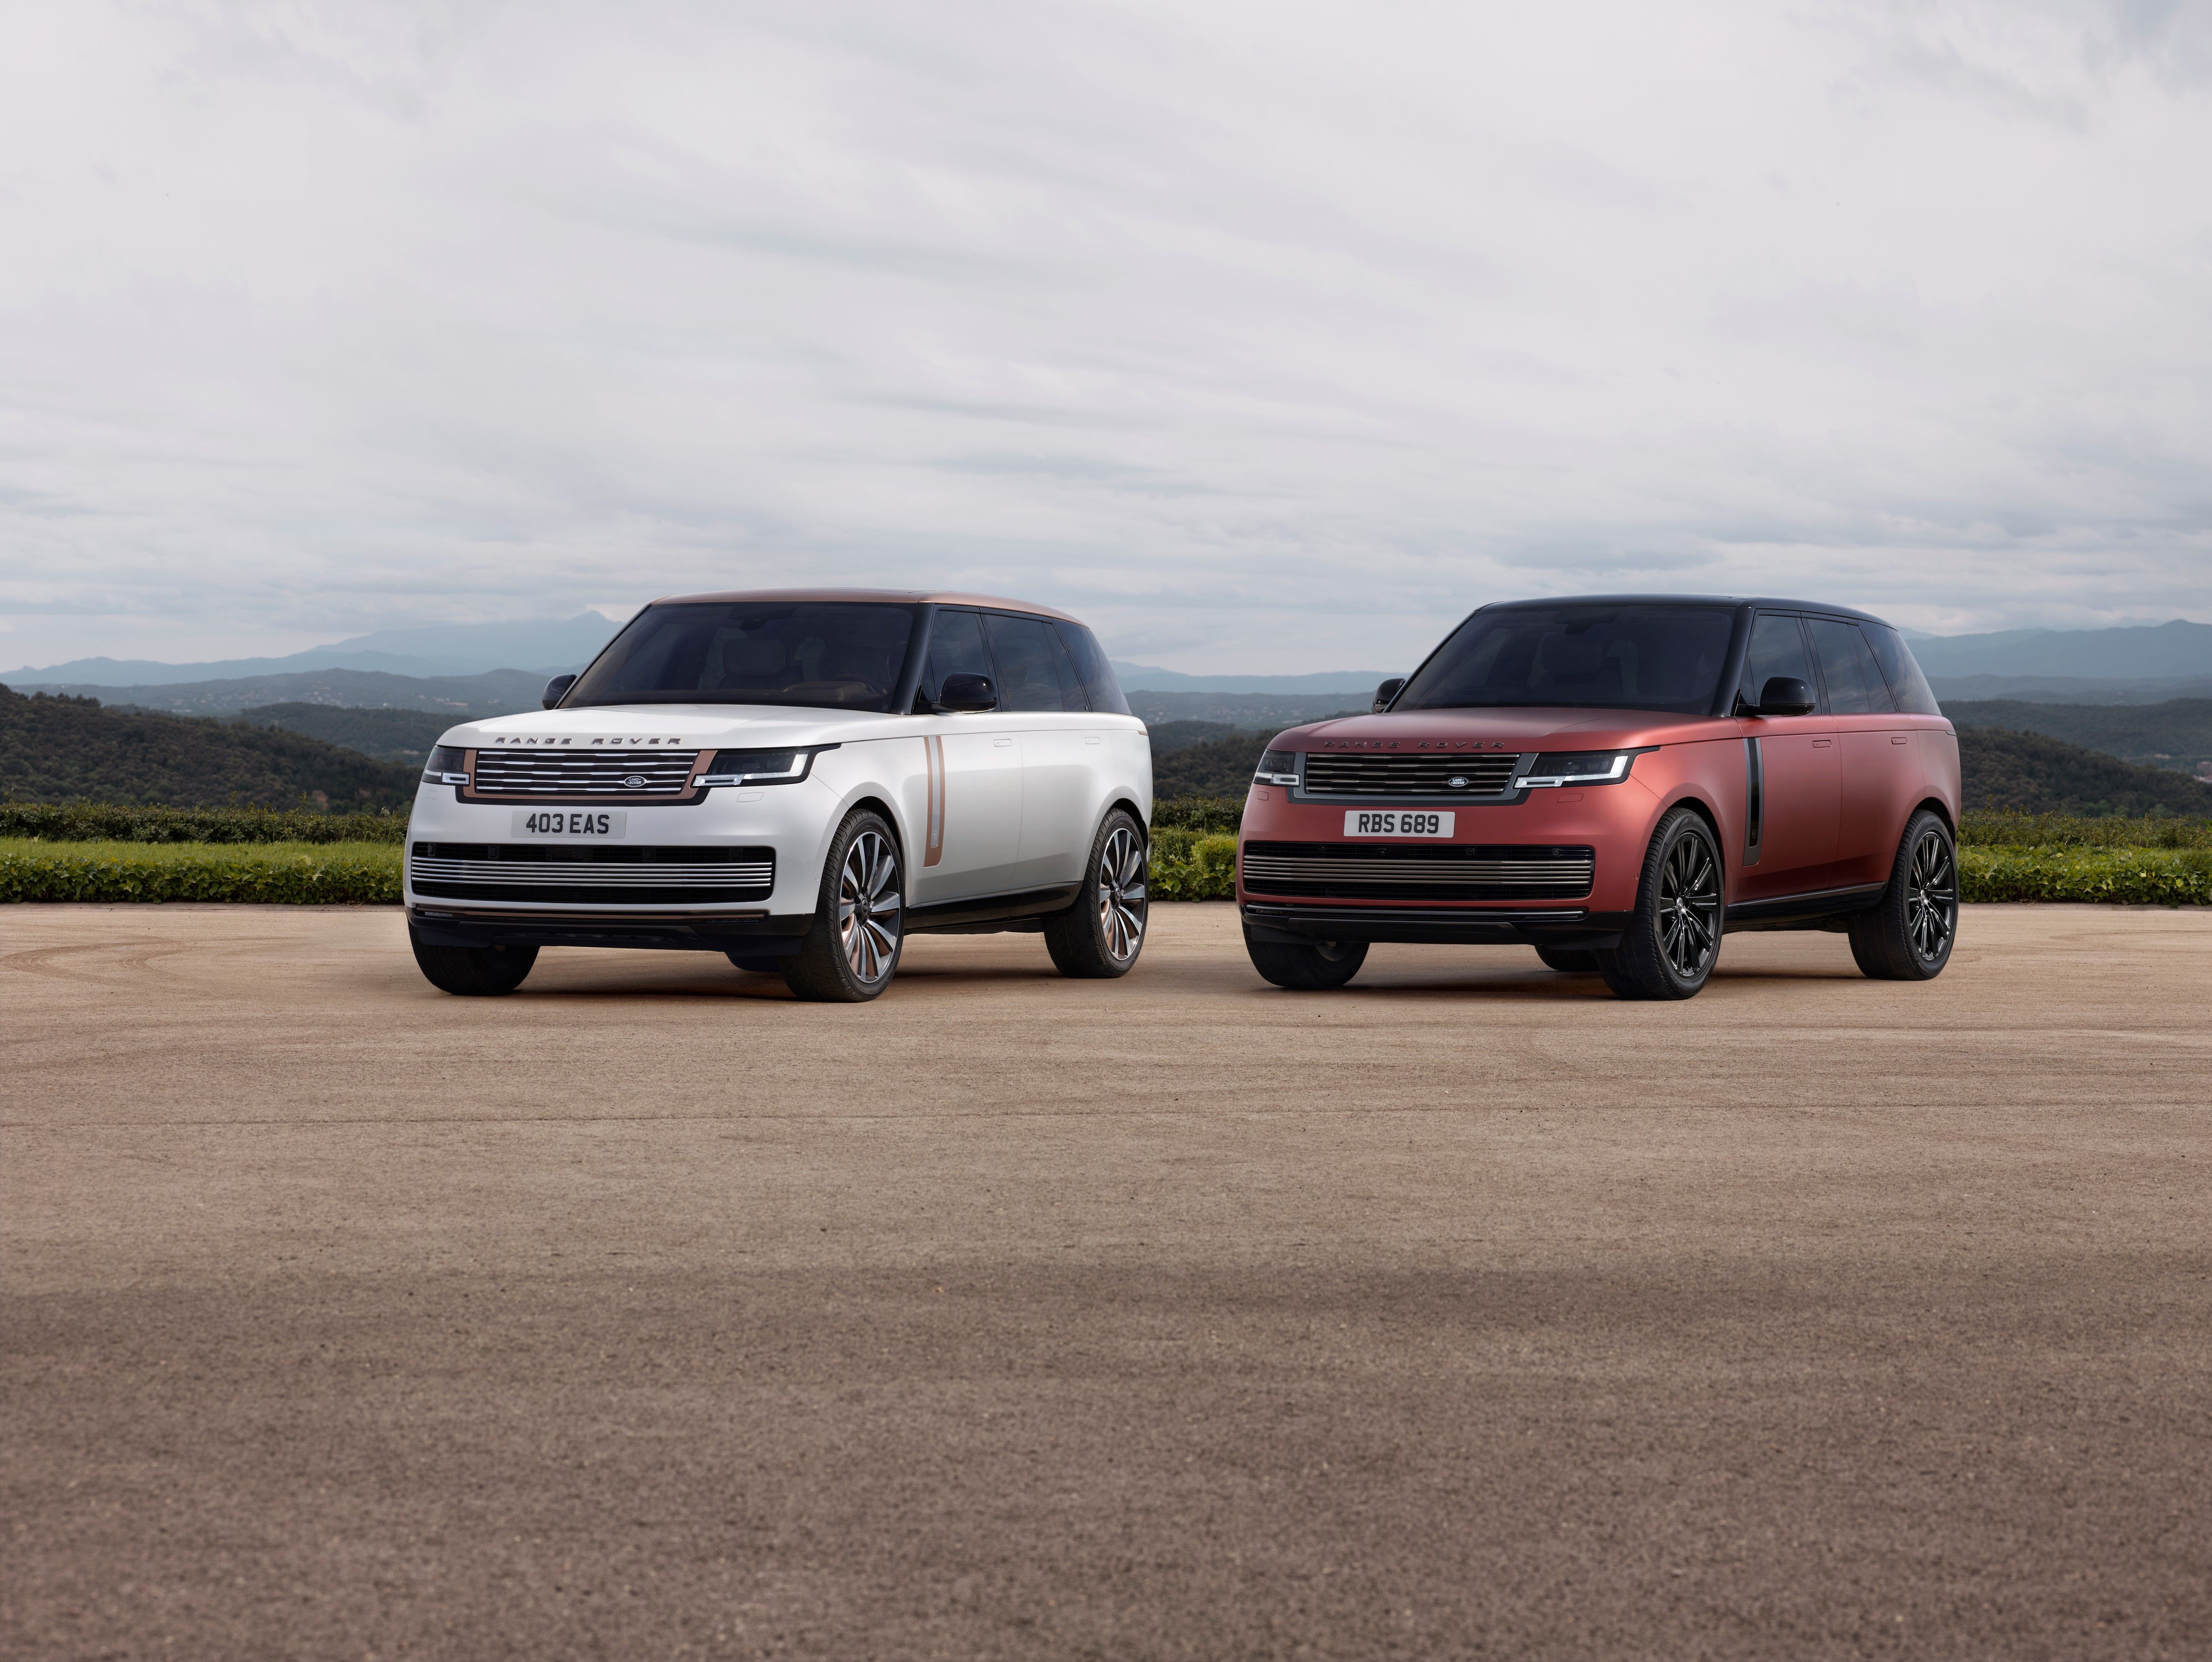 Land Rover vs. Range Rover: What's the Difference?